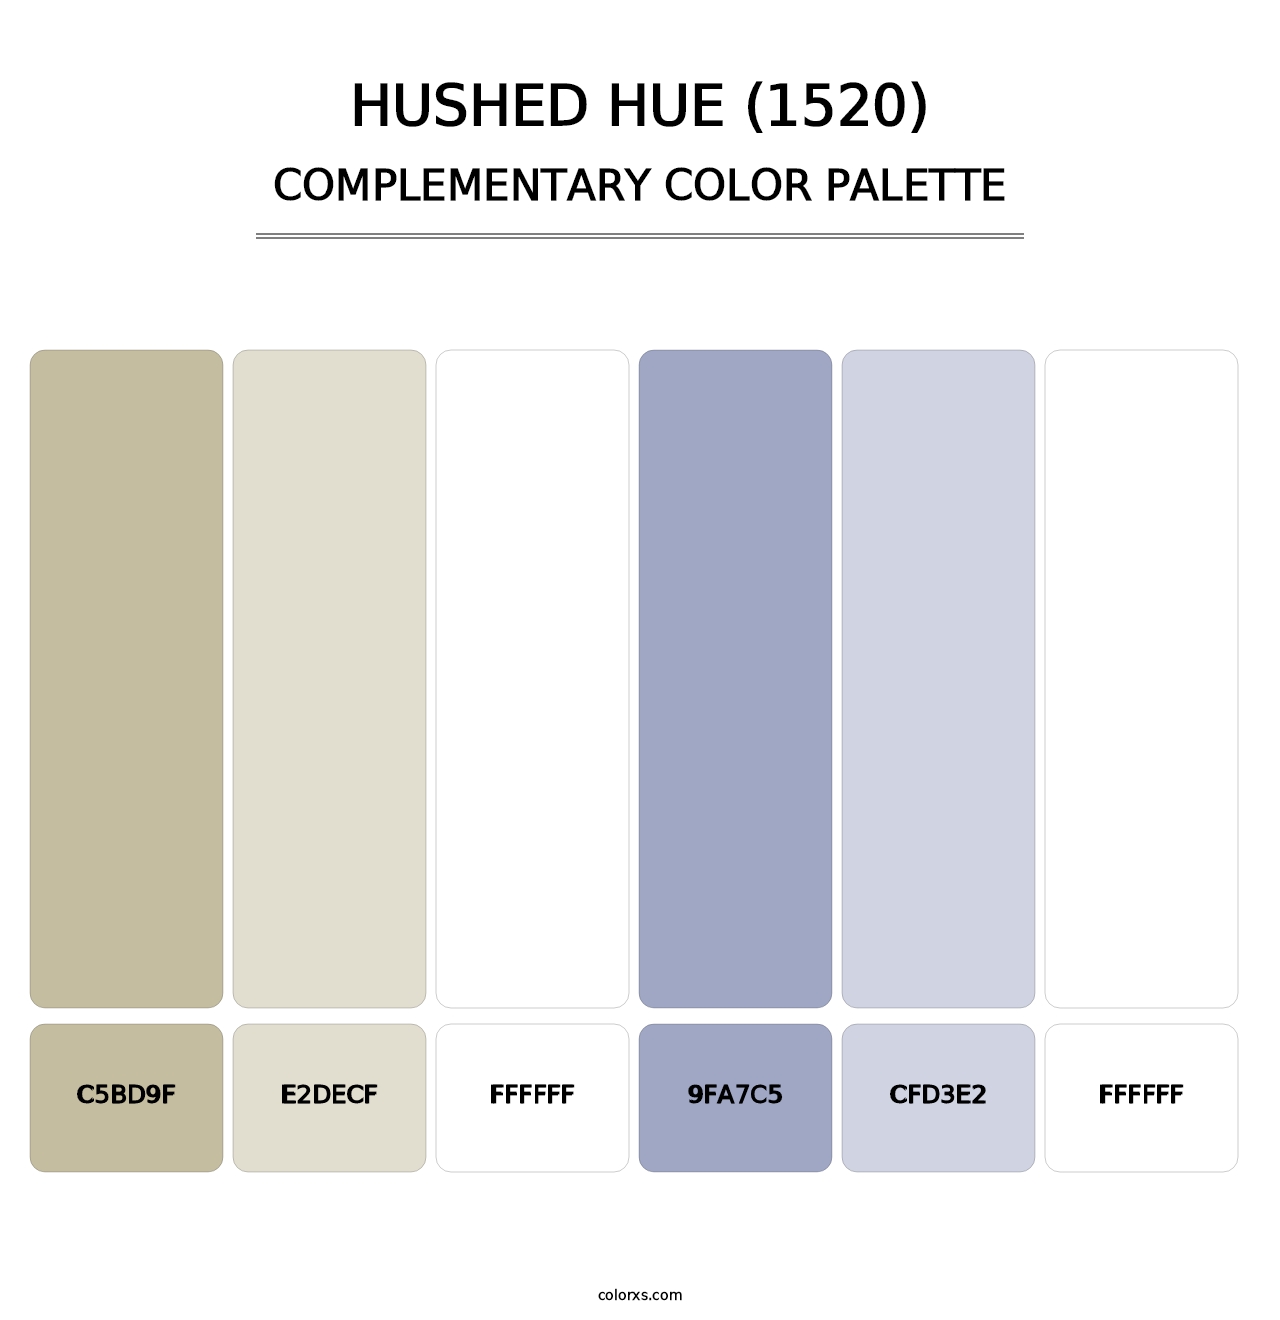 Hushed Hue (1520) - Complementary Color Palette